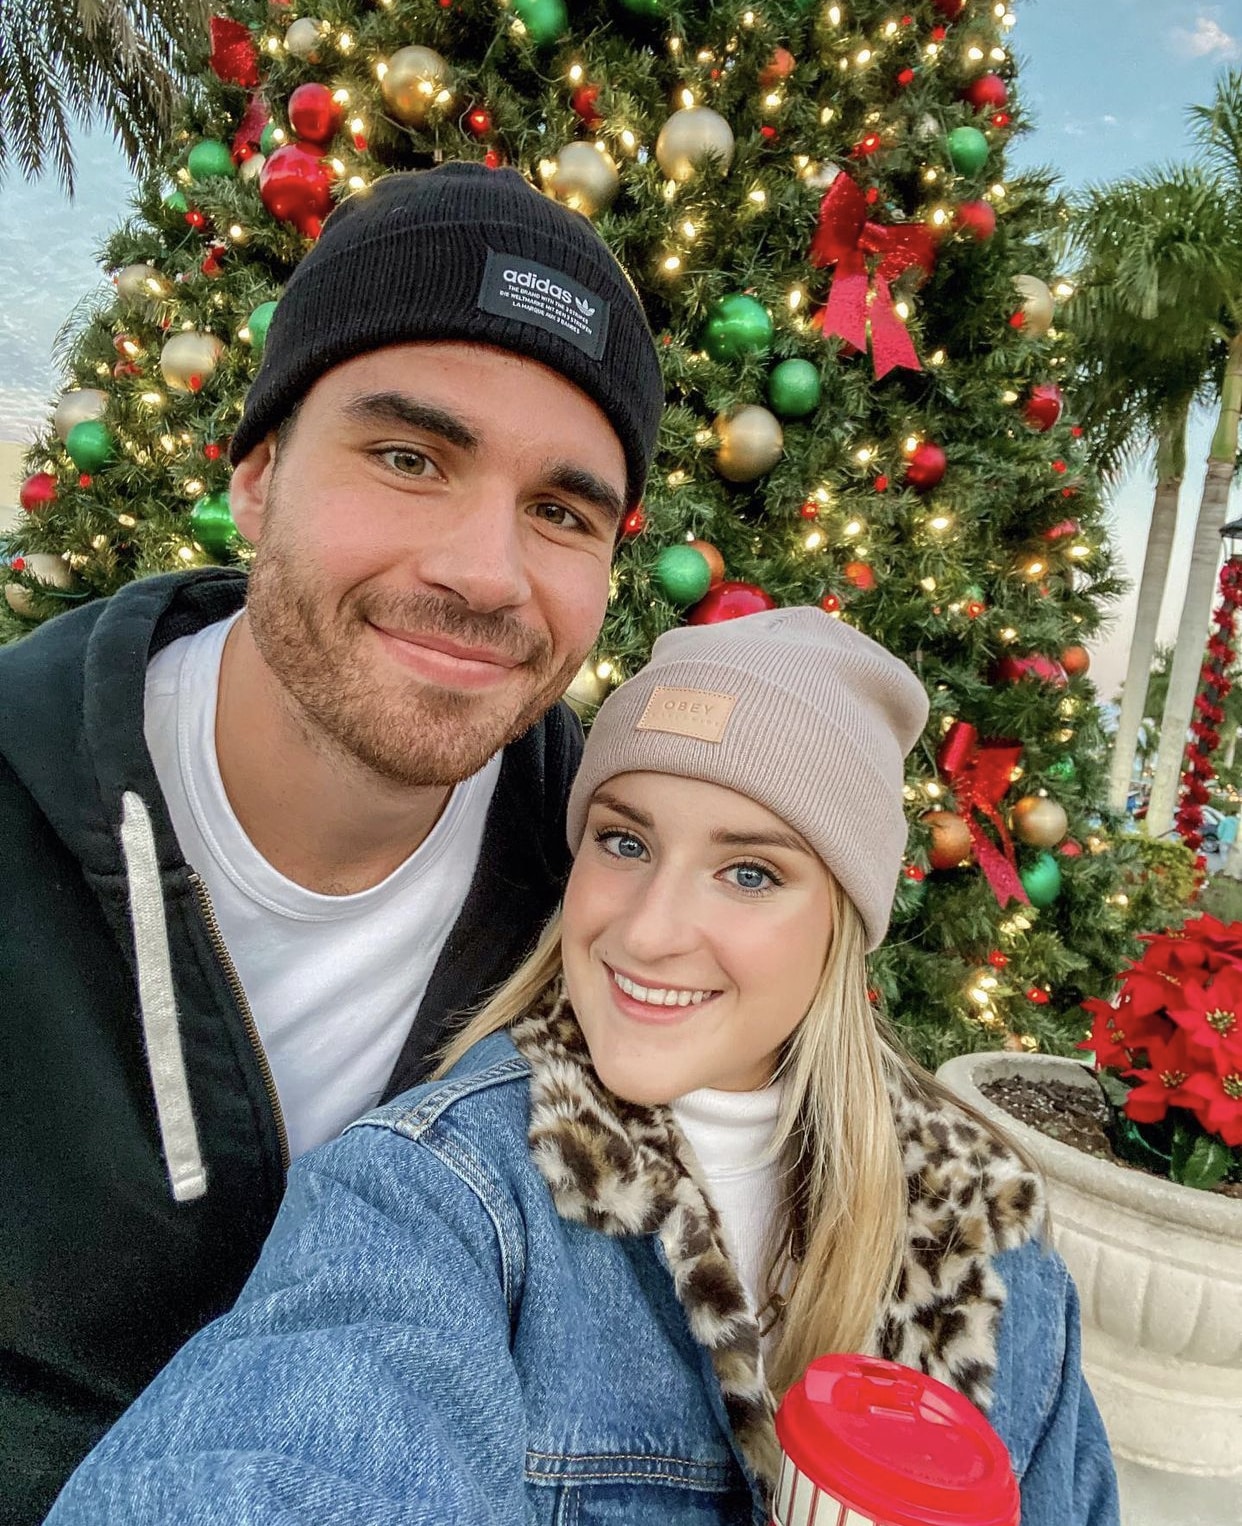 man and woman stand together taking a selfier wearing hats and jackets in front of decorated christmas tree